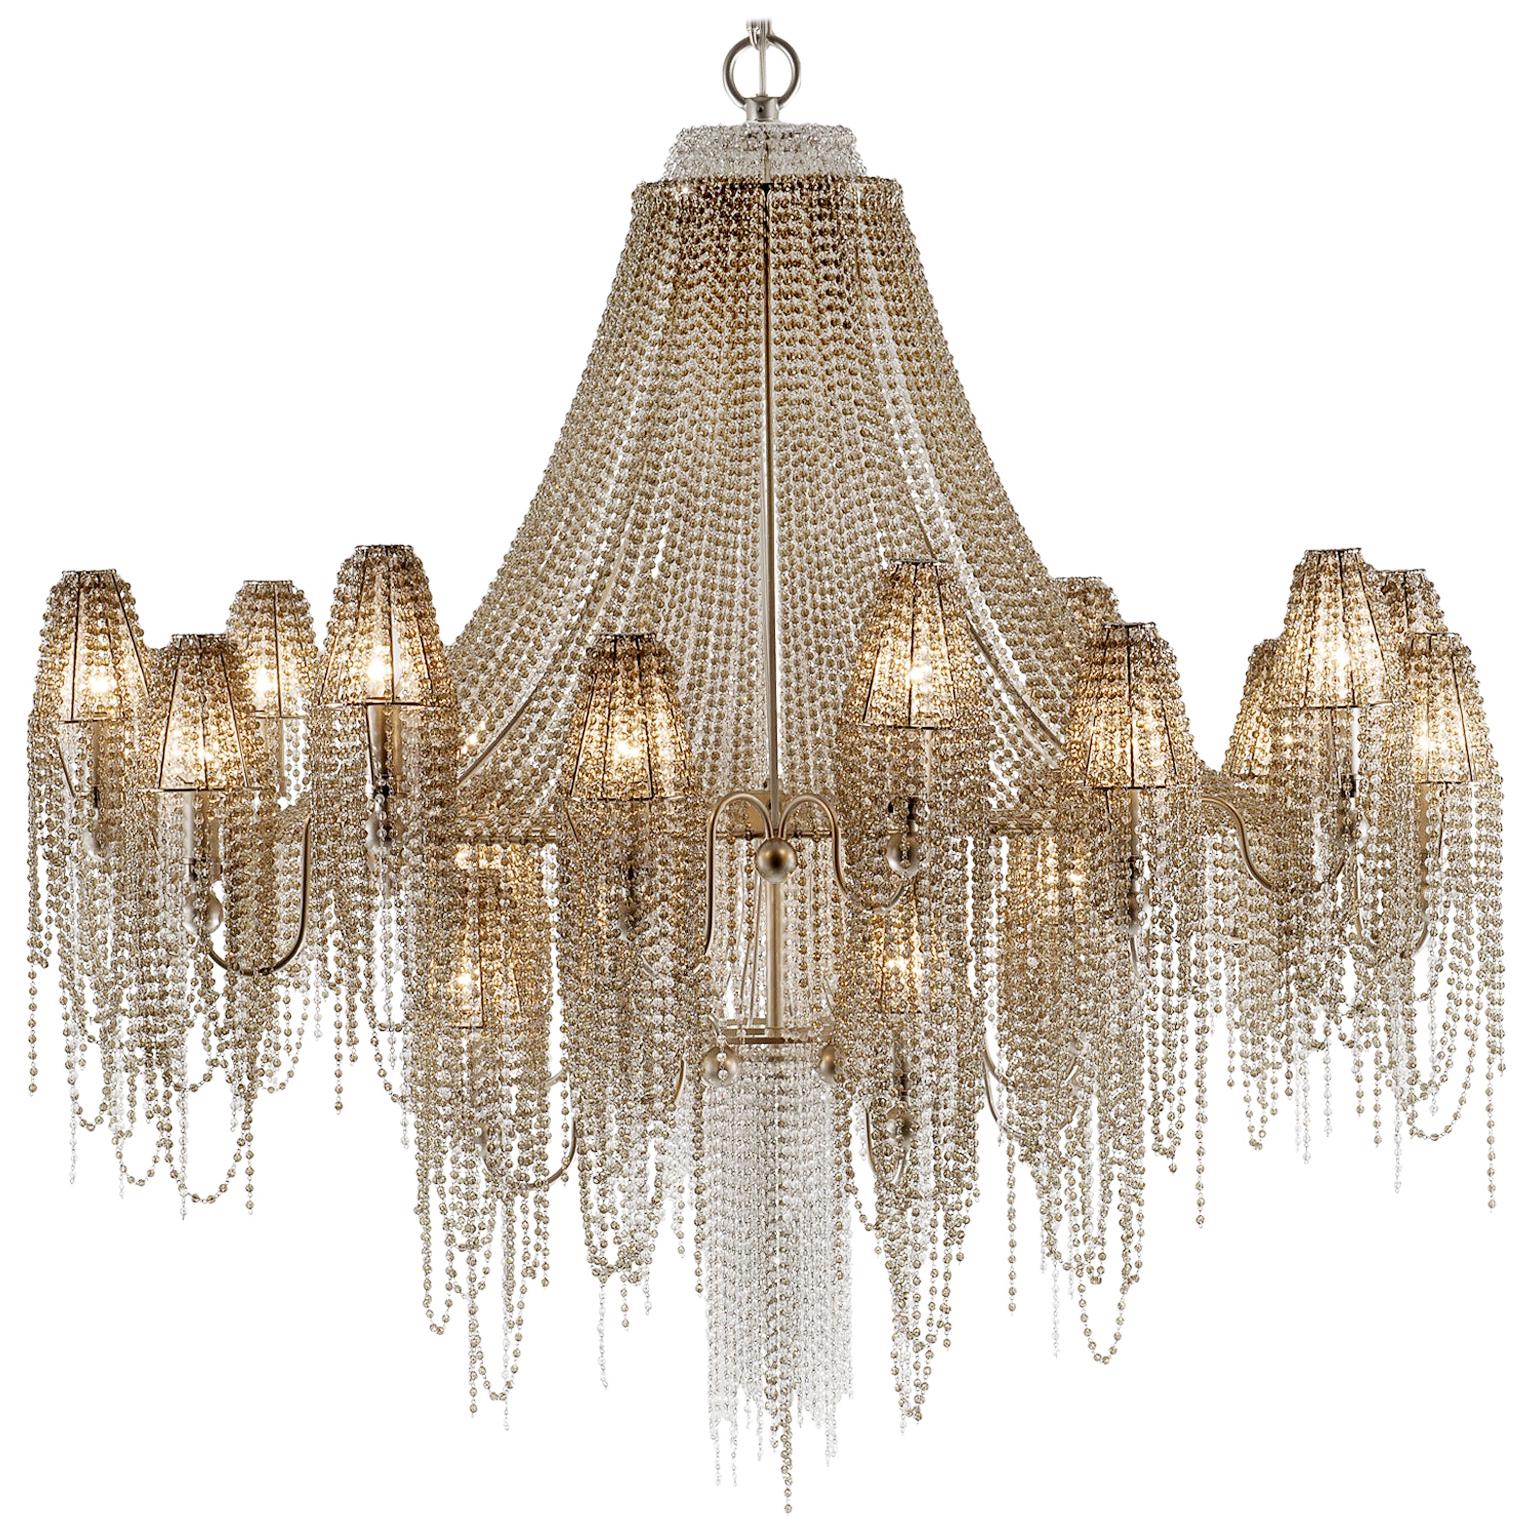 21st Century Burlesque Champagne Chandelier and Crystals by Patrizia Garganti